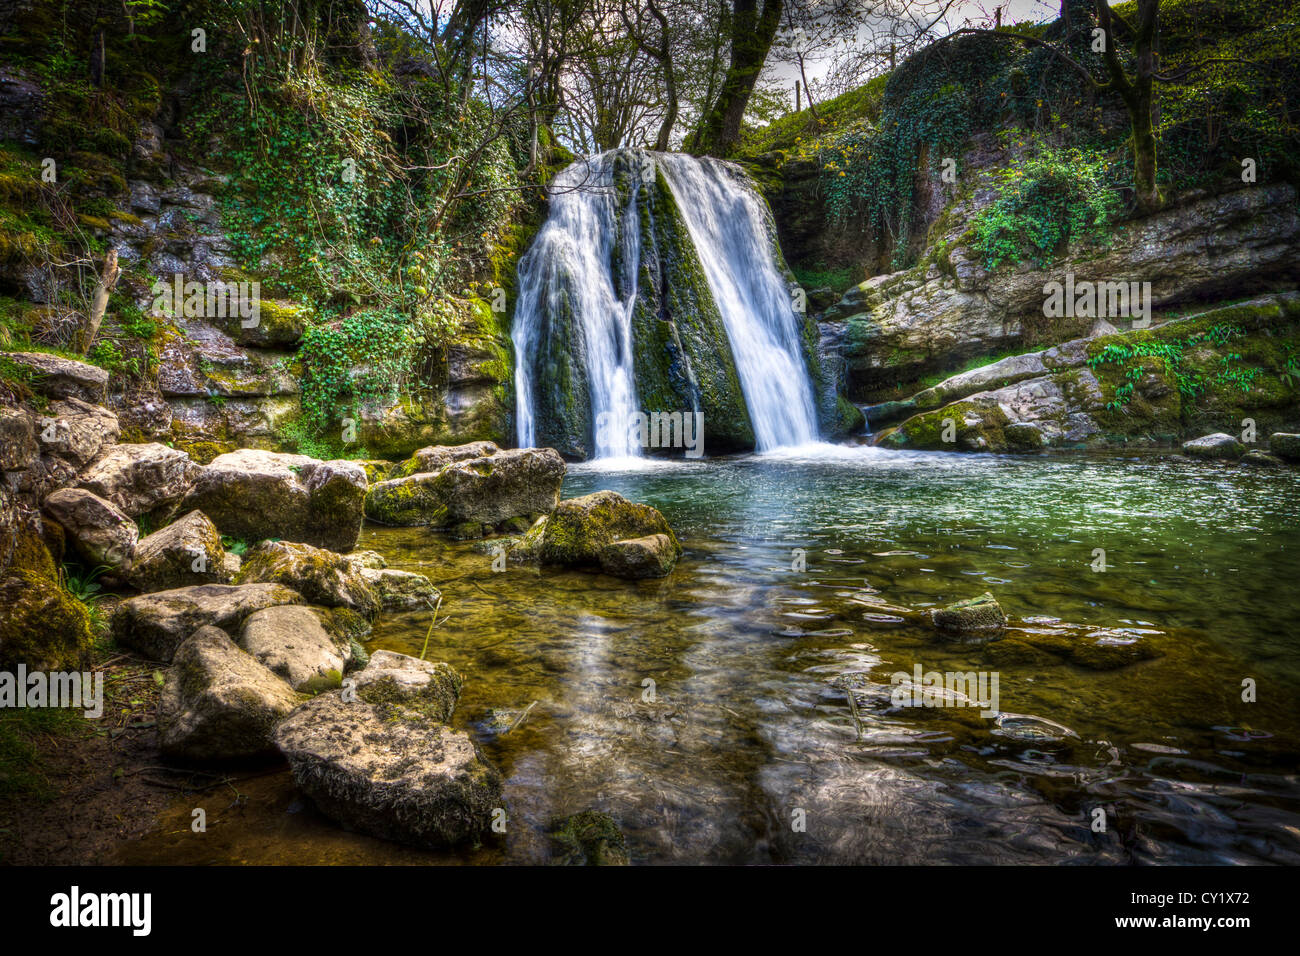 Waterfall called Janet's Foss near Malham in the Yorkshire Dales. Stock Photo